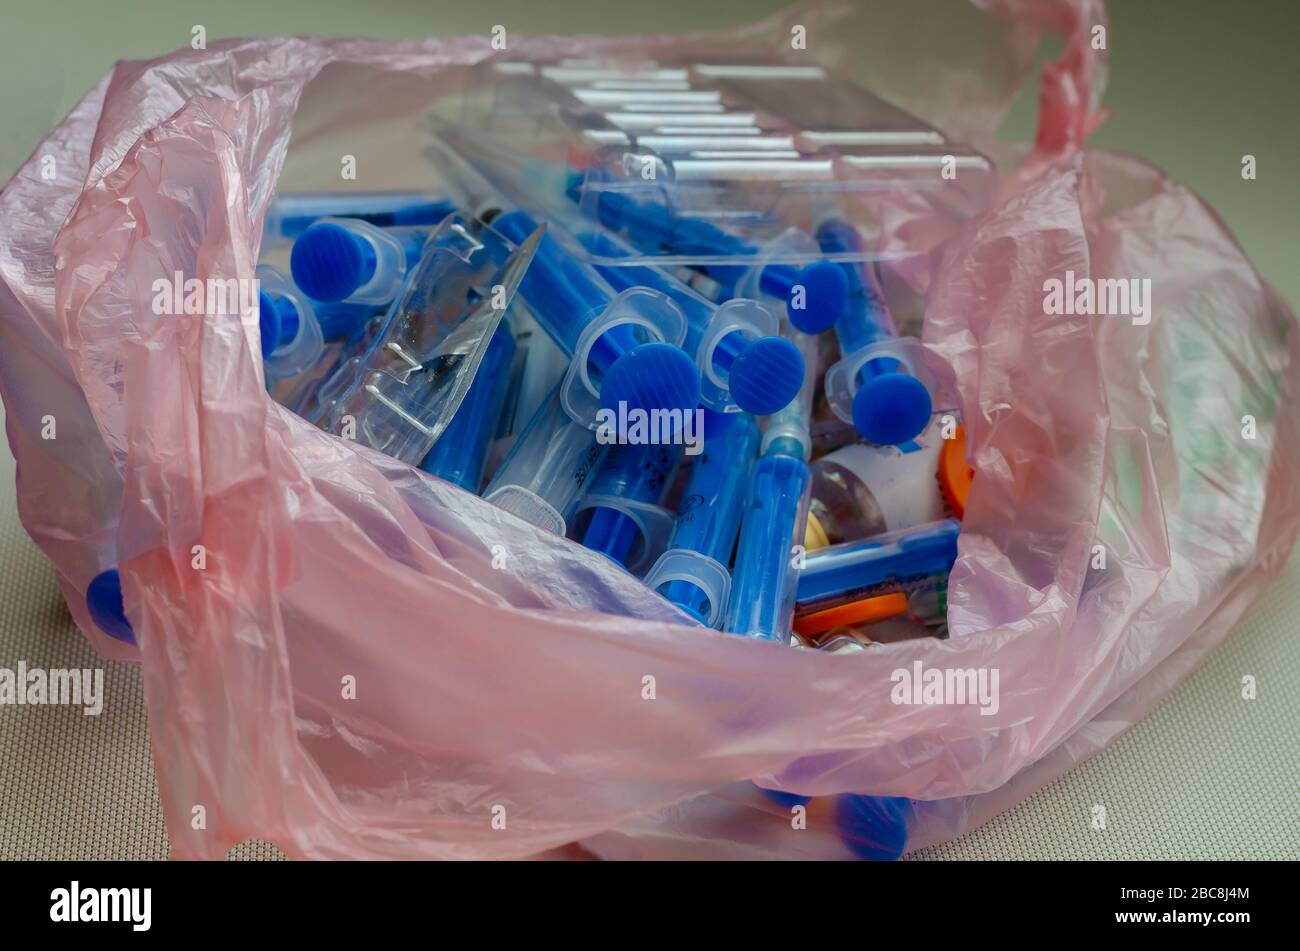 Used syringes, vials and ampoules in a bag. Plastic bag with medical waste. Medical instruments for disposal. Close-up. Selective focus. Stock Photo